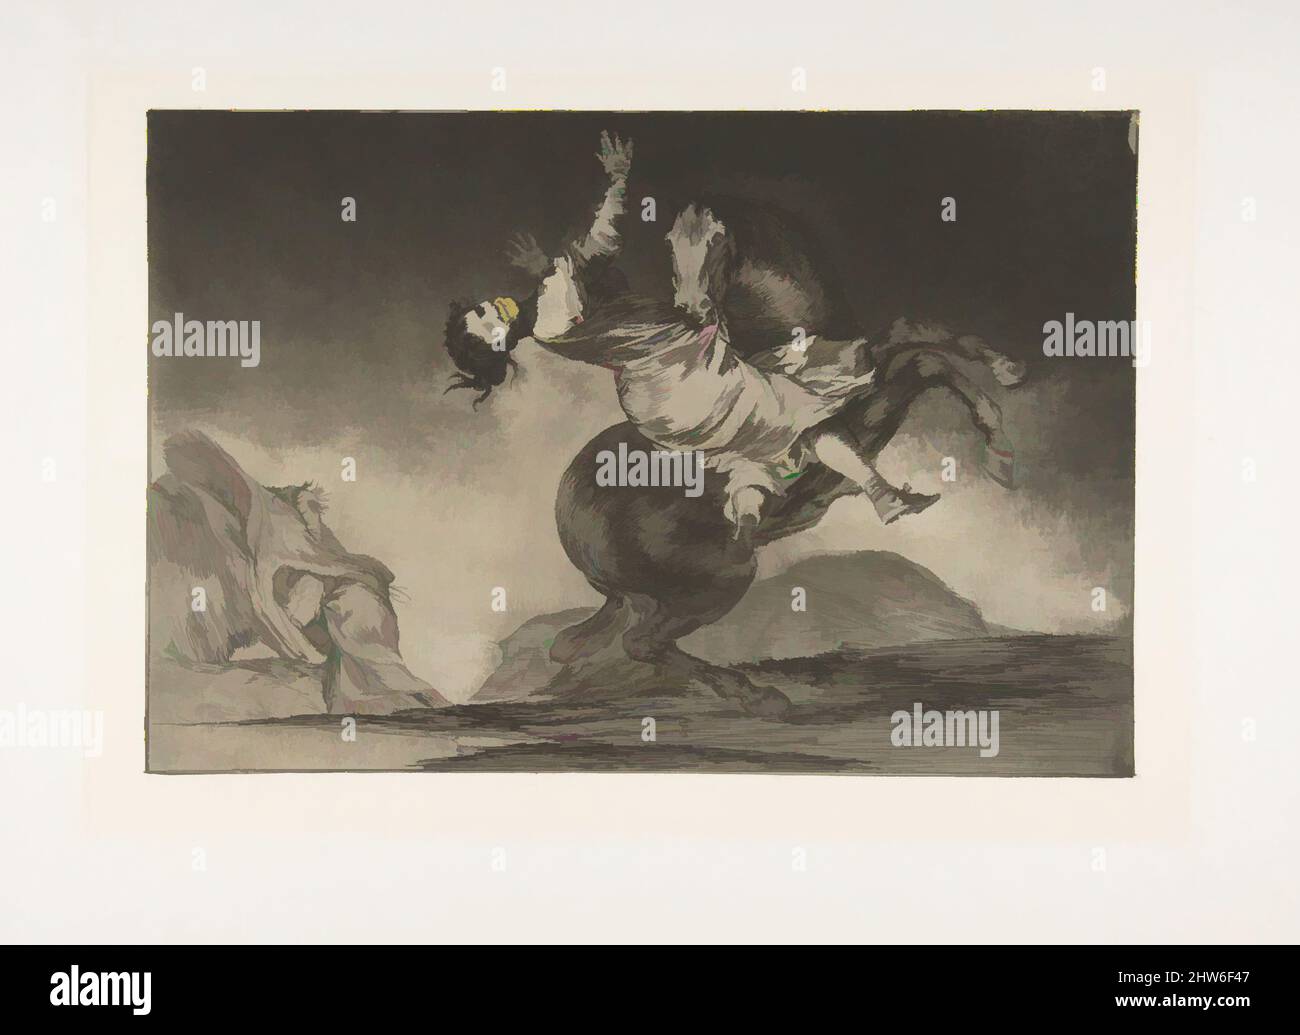 Art inspired by Plate 10 from the 'Disparates': The horse abductor, ca. 1816–23 (published 1864), Etching, burnished aquatint and drypoint, Plate: 9 5/8 × 13 3/4 in. (24.5 × 35 cm), Prints, Goya (Francisco de Goya y Lucientes) (Spanish, Fuendetodos 1746–1828 Bordeaux), From the, Classic works modernized by Artotop with a splash of modernity. Shapes, color and value, eye-catching visual impact on art. Emotions through freedom of artworks in a contemporary way. A timeless message pursuing a wildly creative new direction. Artists turning to the digital medium and creating the Artotop NFT Stock Photo